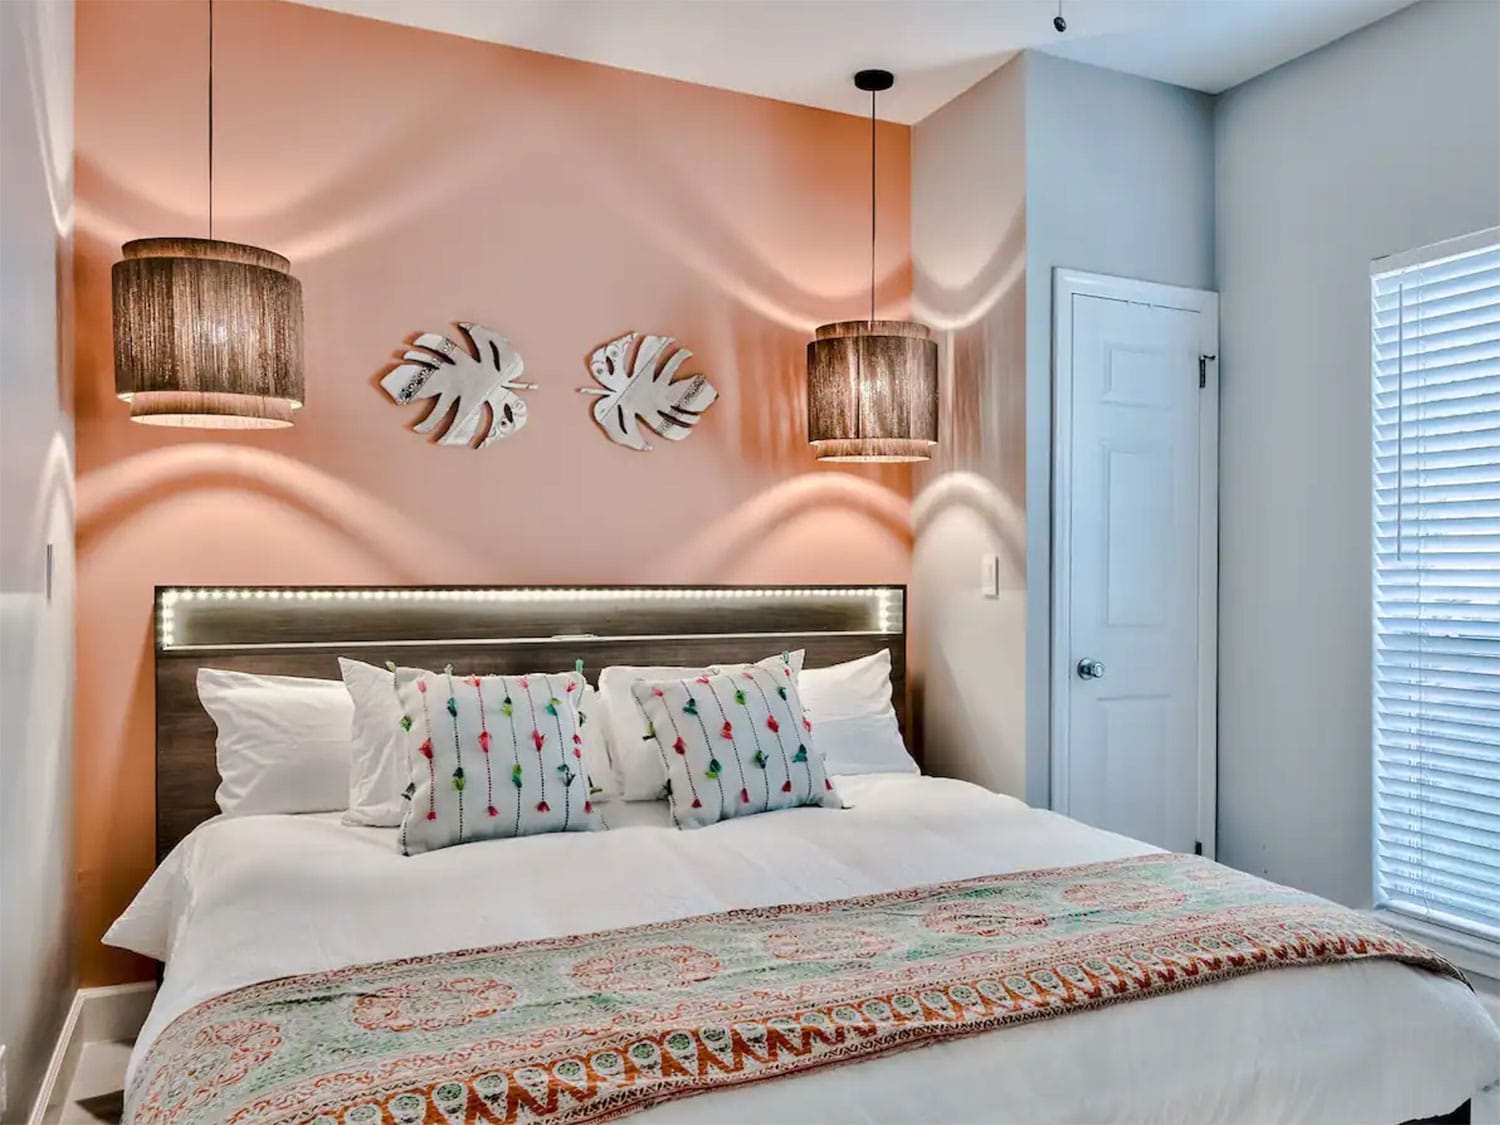 Bedroom with coral painted wall